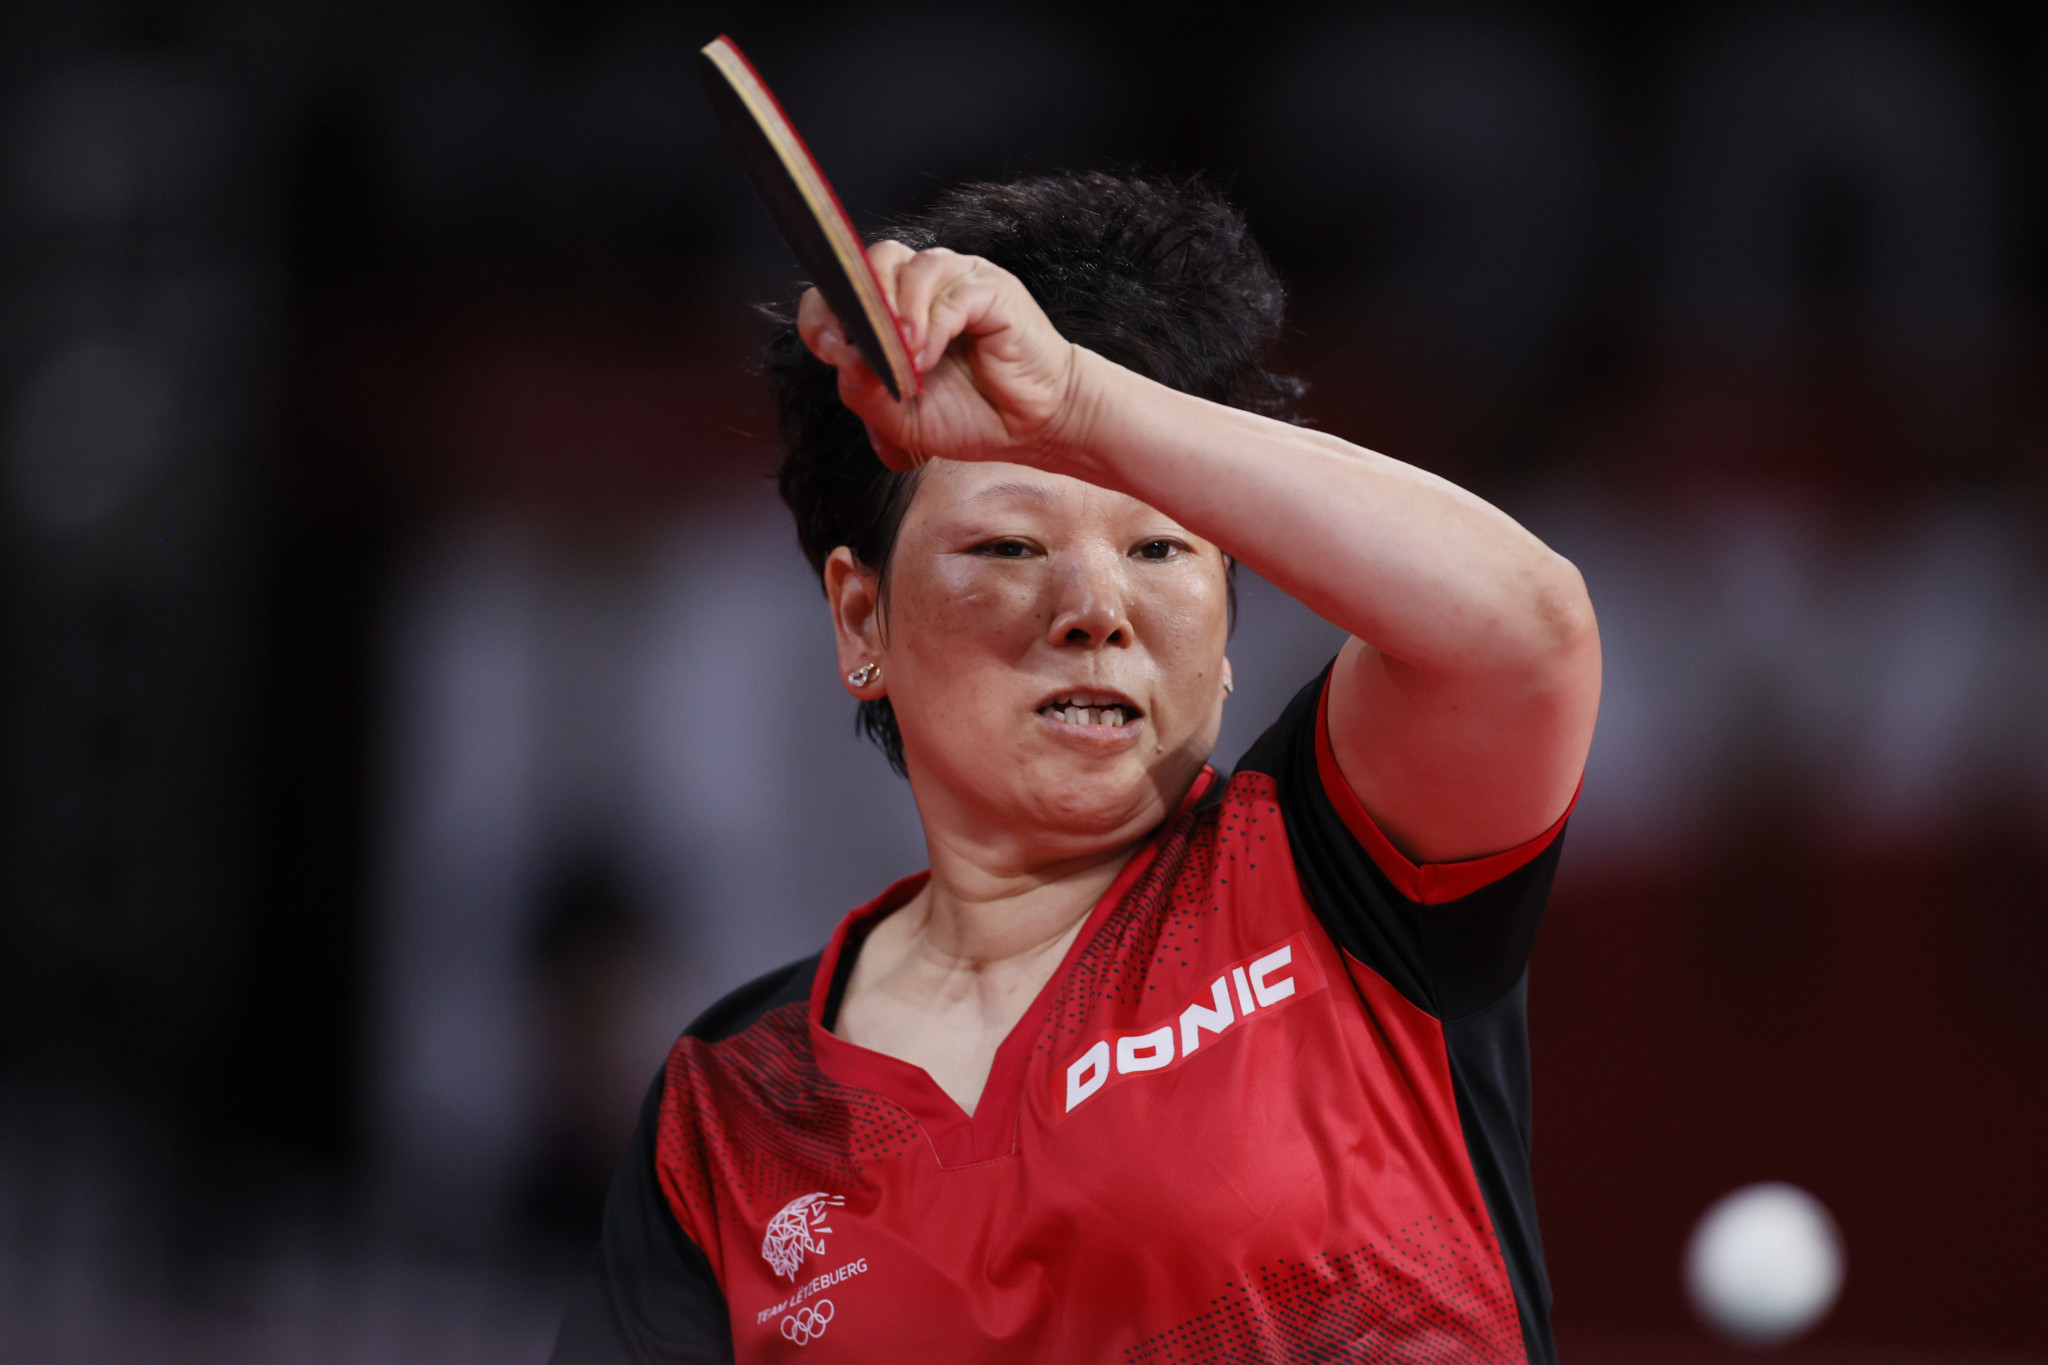 Luxembourg stun South Korea on opening day of World Table Tennis Team Championships